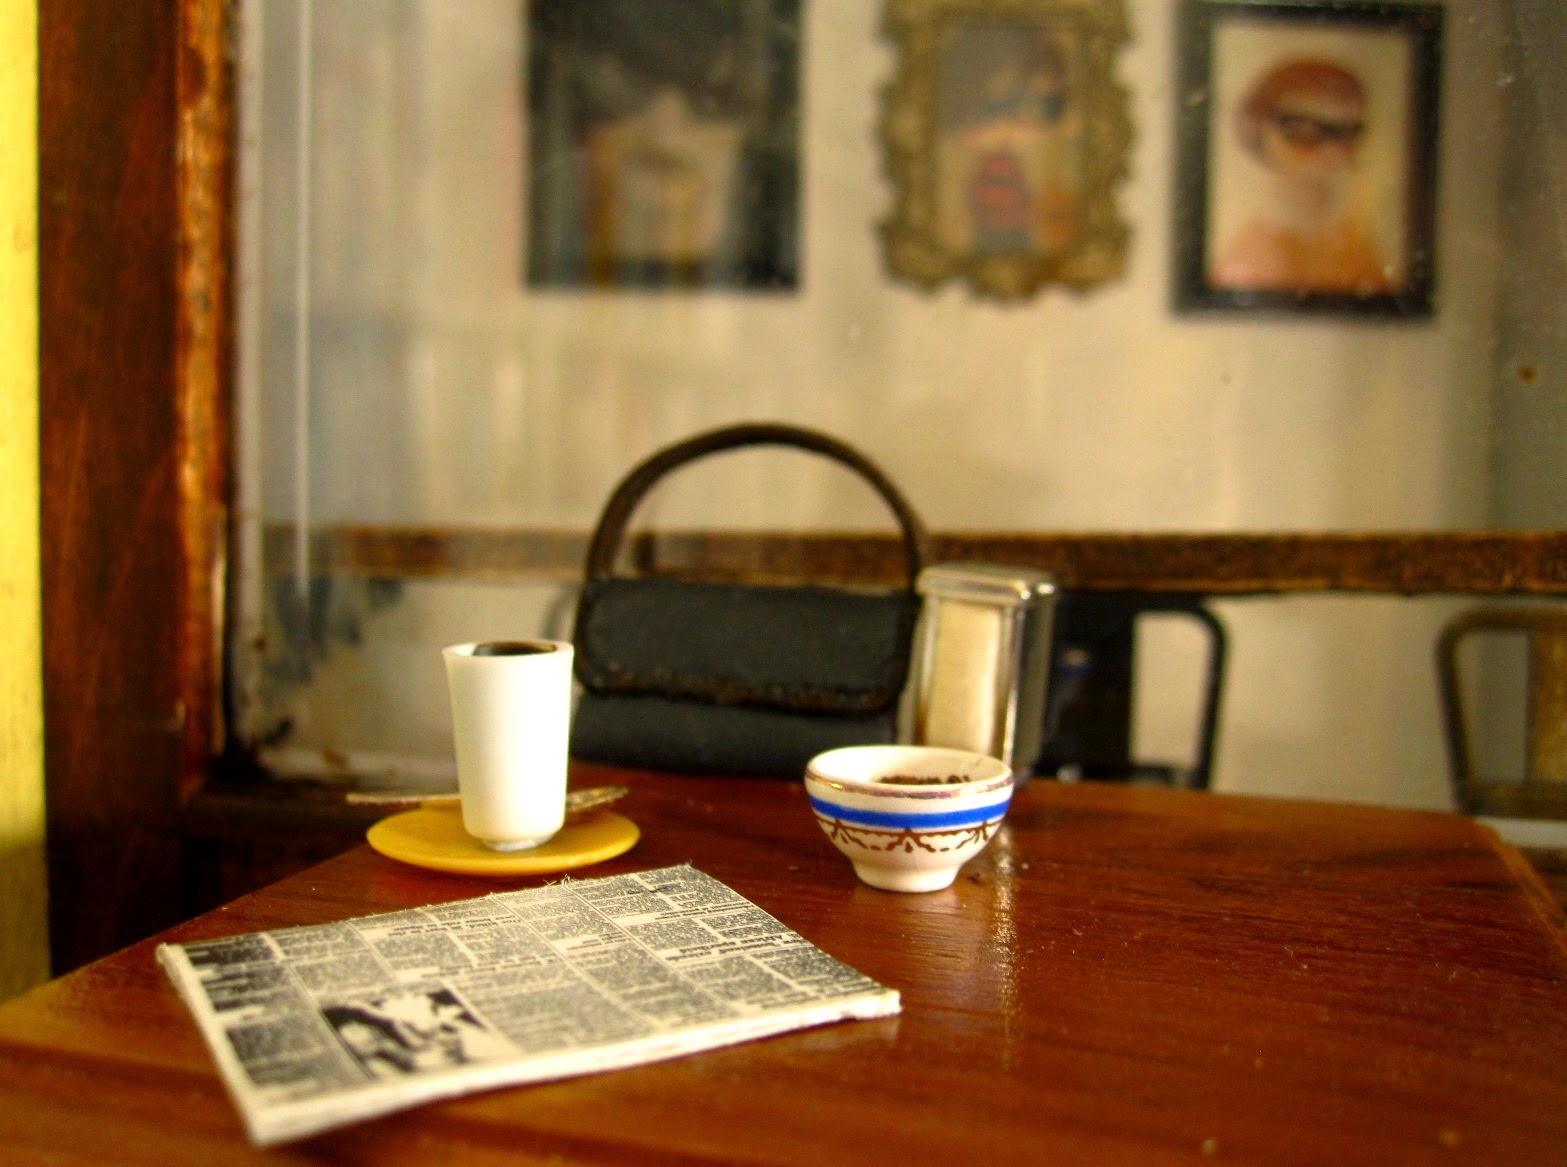 Modern dolls' house miniature cafe table with a newspaper, a latte, a sugar bowl and a handbag on it.